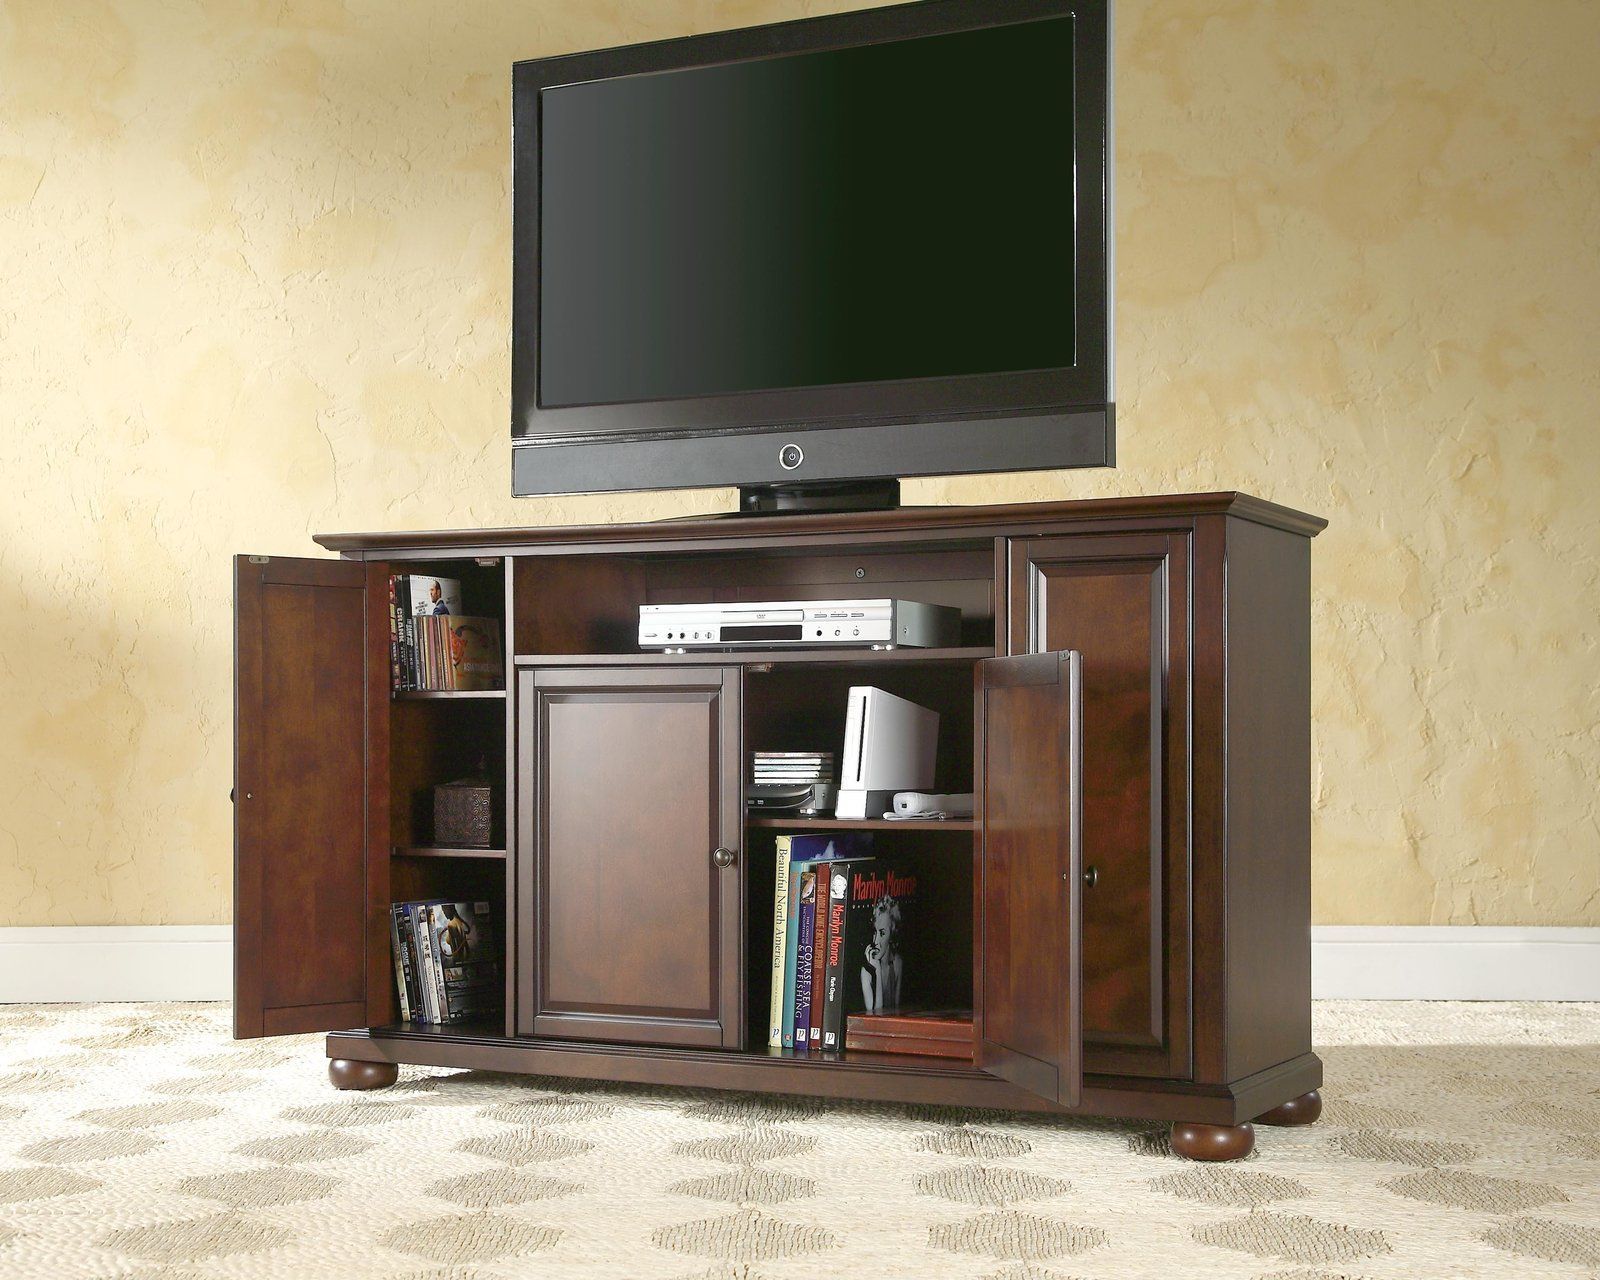 Morris Tv Stand For Tvs Up To 60" (with Images) | 60 Tv Throughout Alexandria Corner Tv Stands For Tvs Up To 48" Mahogany (View 2 of 15)